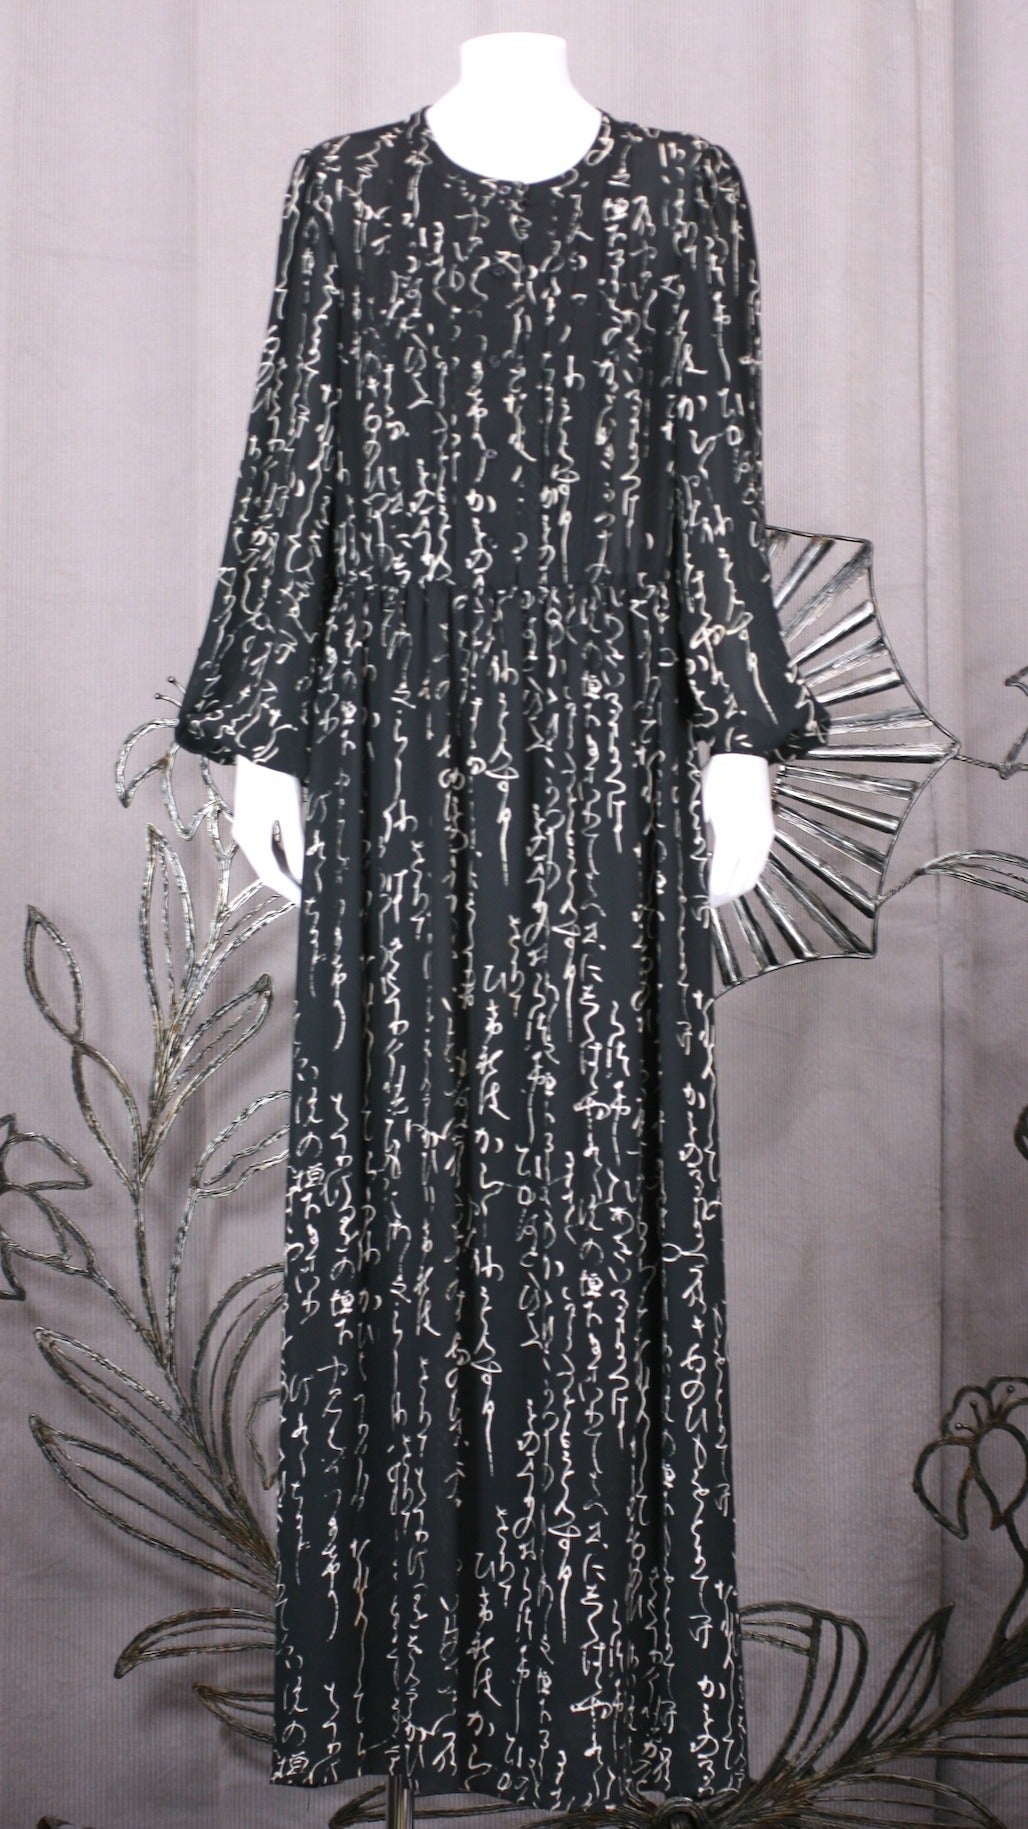 Hanae Mori calligraphic print gown in graphic black and white semi sheer georgette. 
One piece gown with tucked bib and button placket attached to gathered skirt at waist. Easy fit with gently gathered sleeves. Lined in rayon. Japan 1990's.
Belt